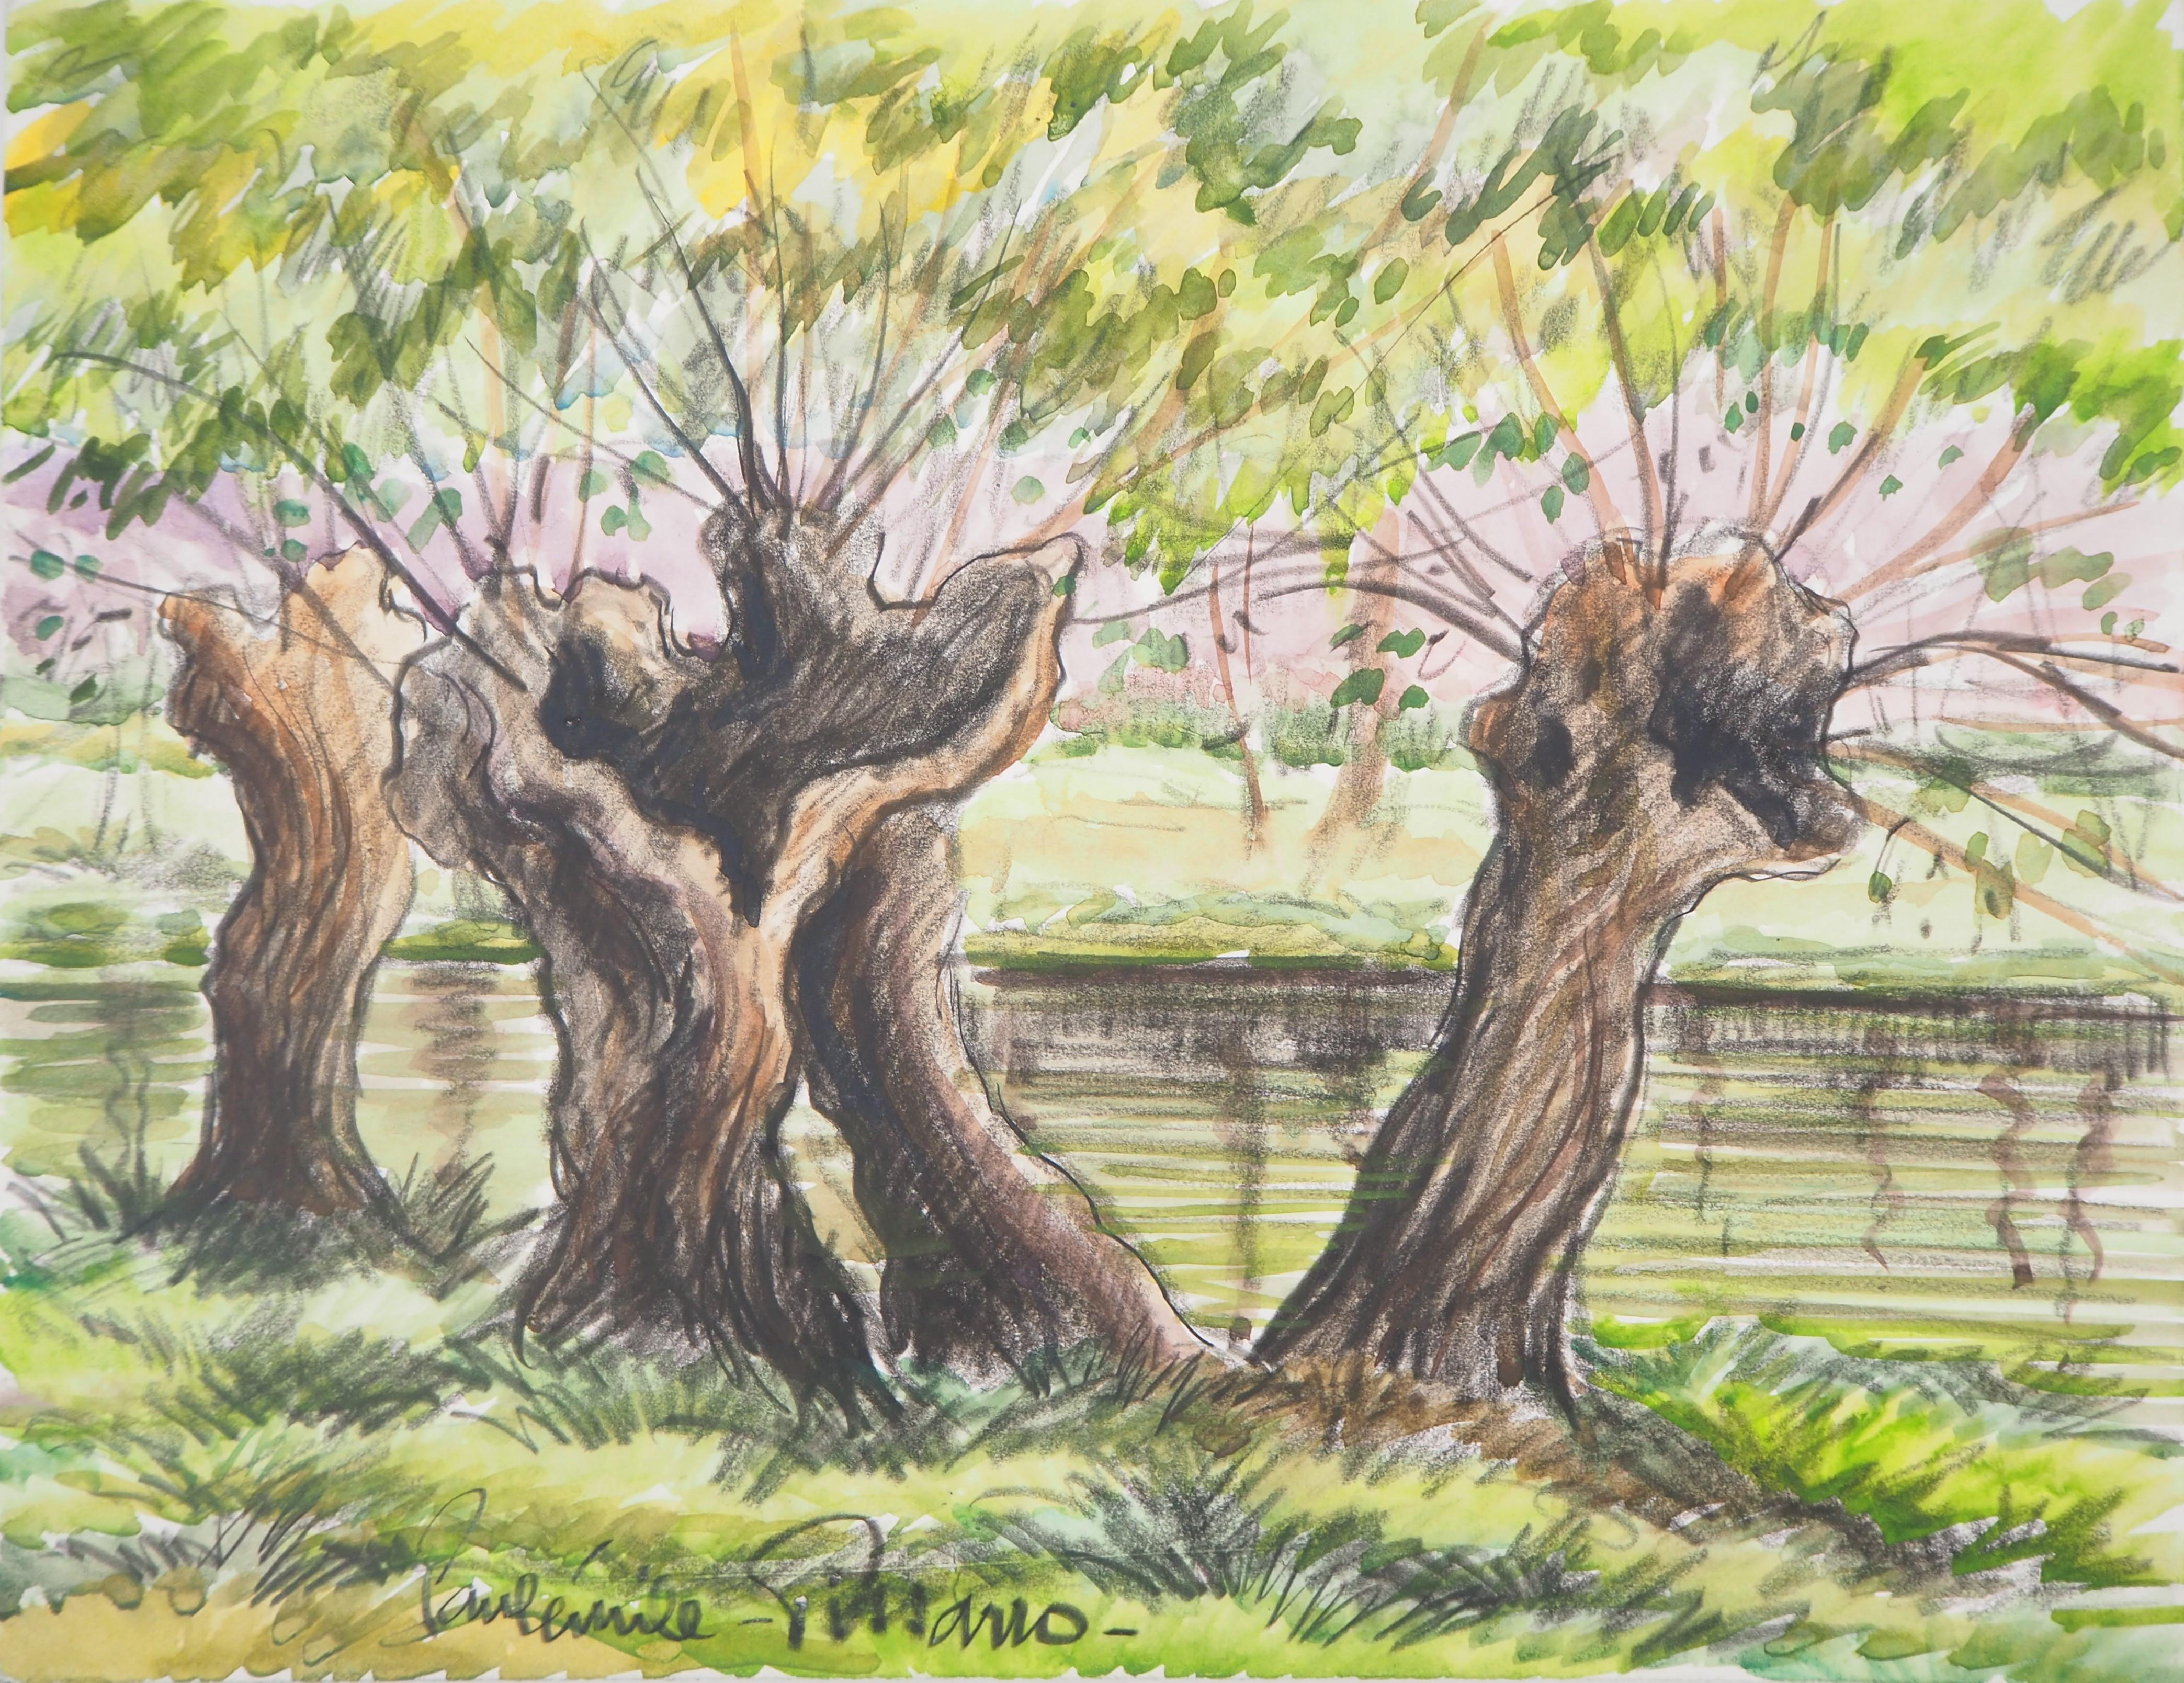 Paul Emile Pissarro Landscape Art - Old Trees near a Canal - Original watercolor painting - Signed